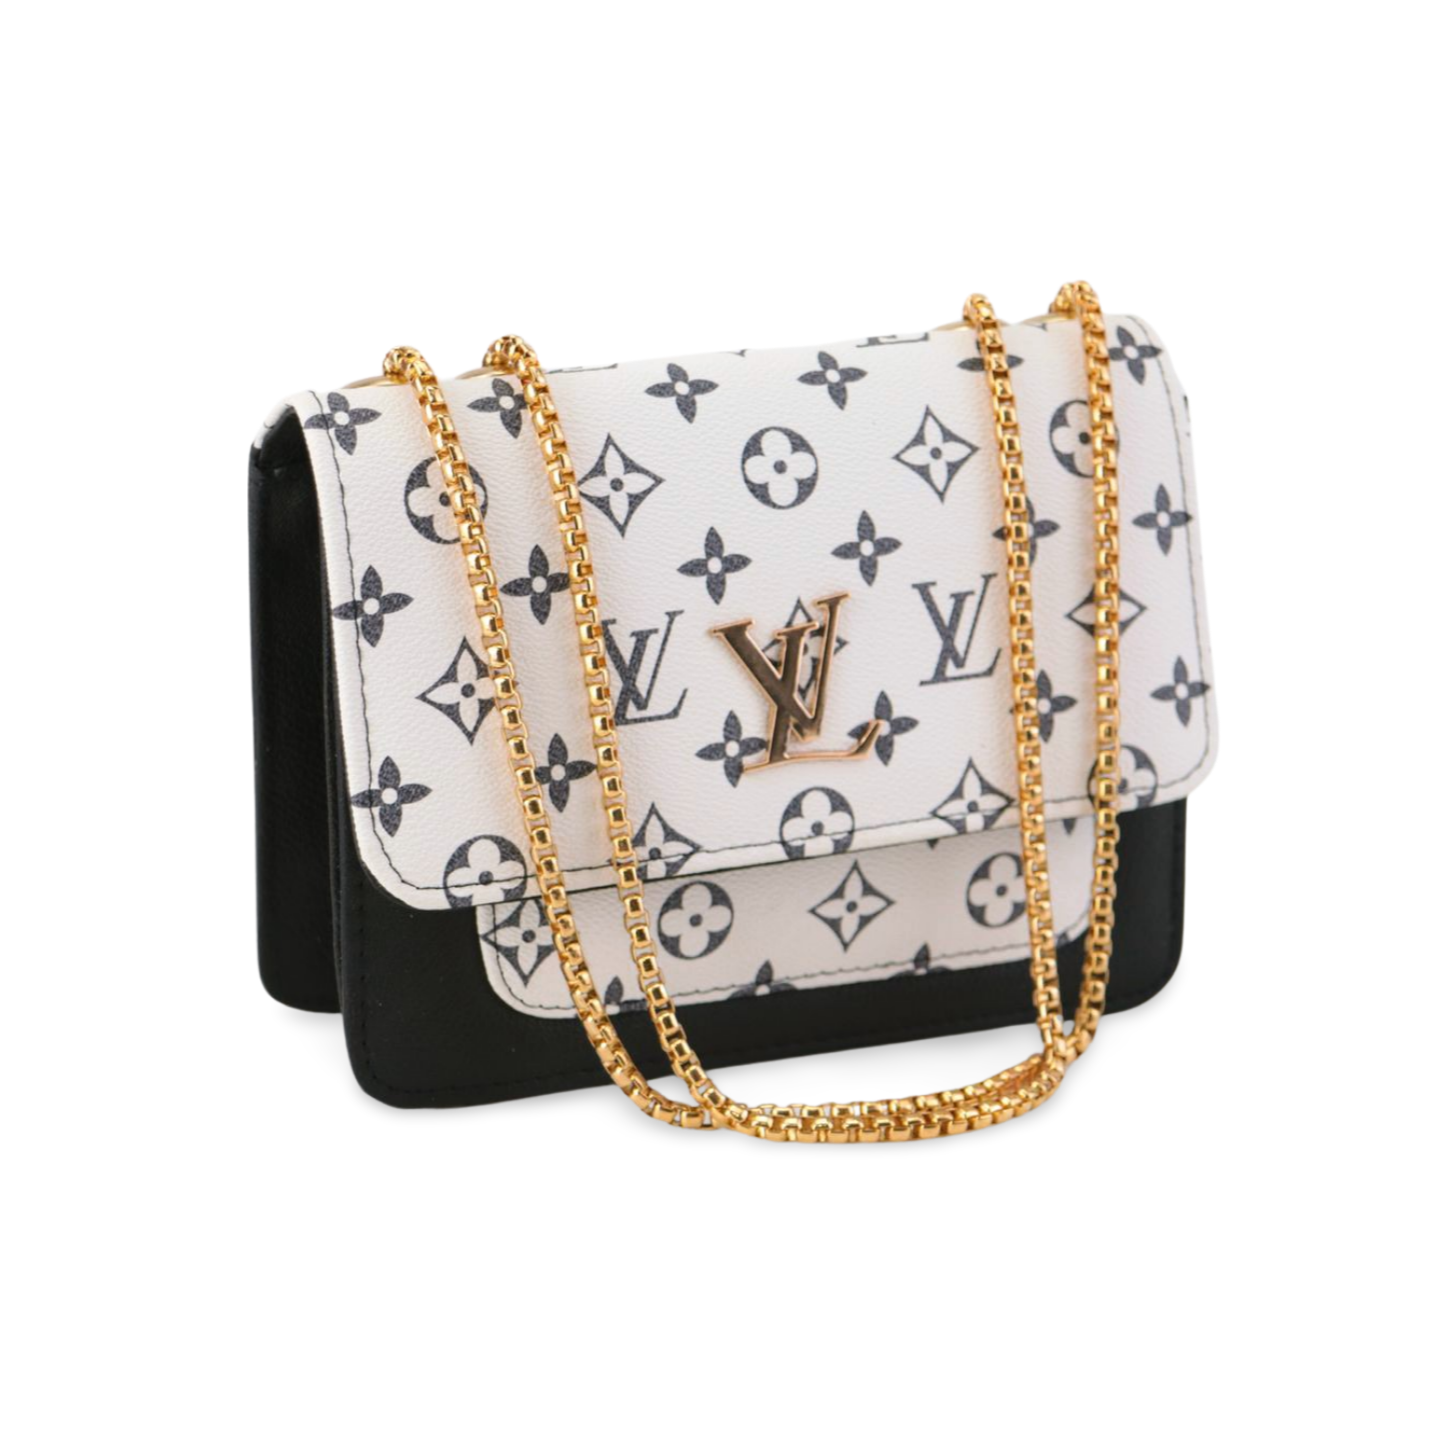 Womens Crossbody Bag with Gold Chain - Stylish and Versatile Purse for Women